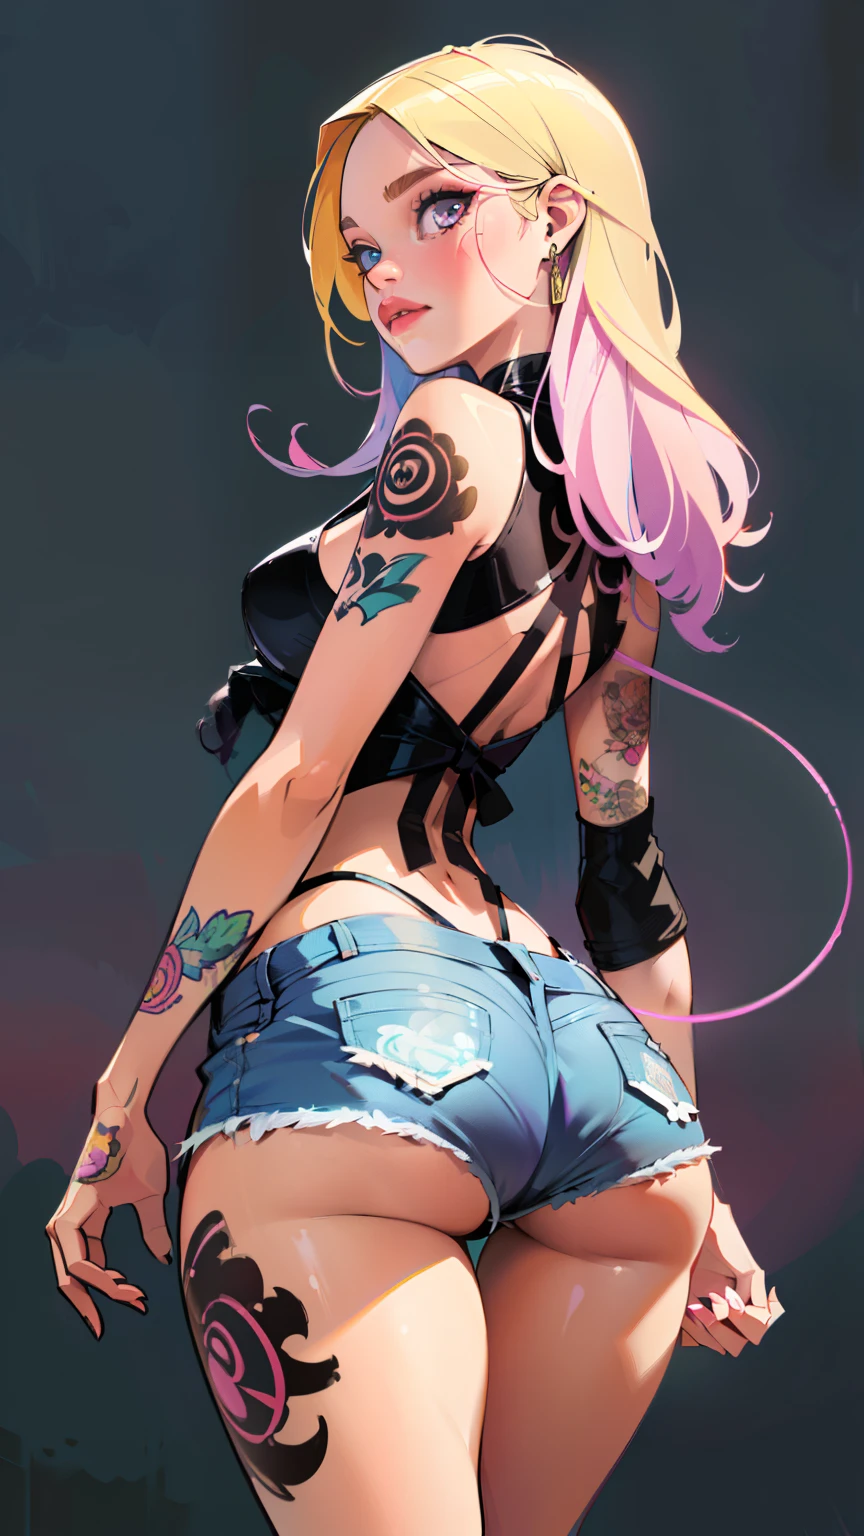 Background, In chic boho style, purple hair, Long Hair, super long hair, from back,  Ice cream print, multi-colored neon lights, neon garlands, lavender mint hair, mixed-language_SMS, Japanese graffiti, (beautiful and clear background:1.2),, fantastic paintings ,graffit style, olhos altamente detalhados , Underwear, lace, latex, blonde girl, Cat Print, tattoo, Loving, Love, ultra detailed hair, Masterpiece, Best Quality, hig quality, high-resolution, detail enhancement, ((most beautiful image in the world)), Masterpiece, Best Quality, hig quality, high-resolution, detail enhancement, ((most beautiful image ), Shiny pink degrade hair, ultra short fitted Stampa Flores, Rollers,  tights in a mesh, Short denim shorts,  art by stjepan sejic, art by j scott campbell, art by guillem march, art by citemer liu, 4k, high-resolution, comic book character, comic, high quality detailed,   style of ::2.0 comix illustration style,tatoon style, hig quality, high-resolution, detail enhancement, 8K, HD, Best Quality, hig quality, high-resolution, detail enhancement, 8K, HDR, Sharp focus, Ultra Detailed, Perfect lighting, Curvy Body, Lush breasts, Curvy hips